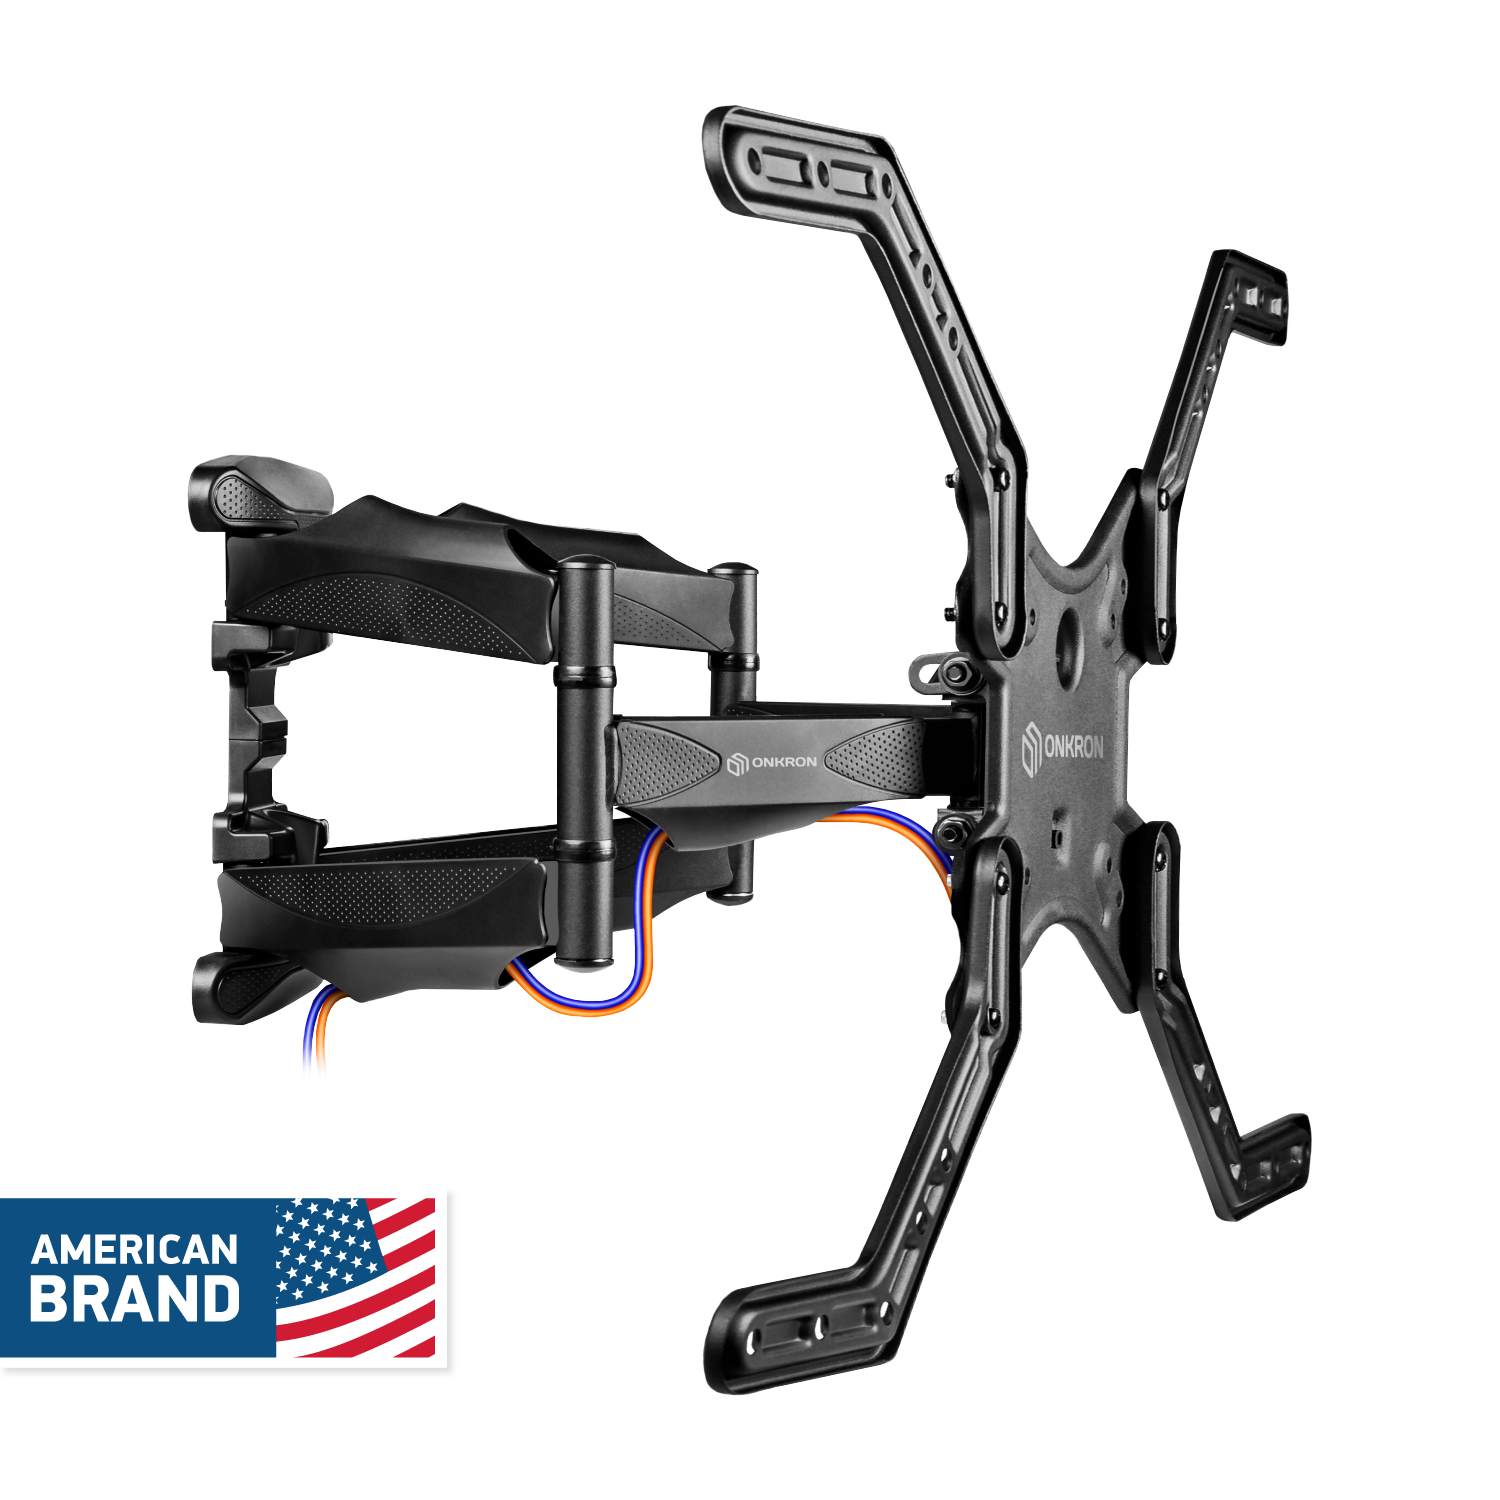 Full Motion TV Wall Mount for 39" to 65 inch Screens up to 88 lbs ONKRON M5L, Black